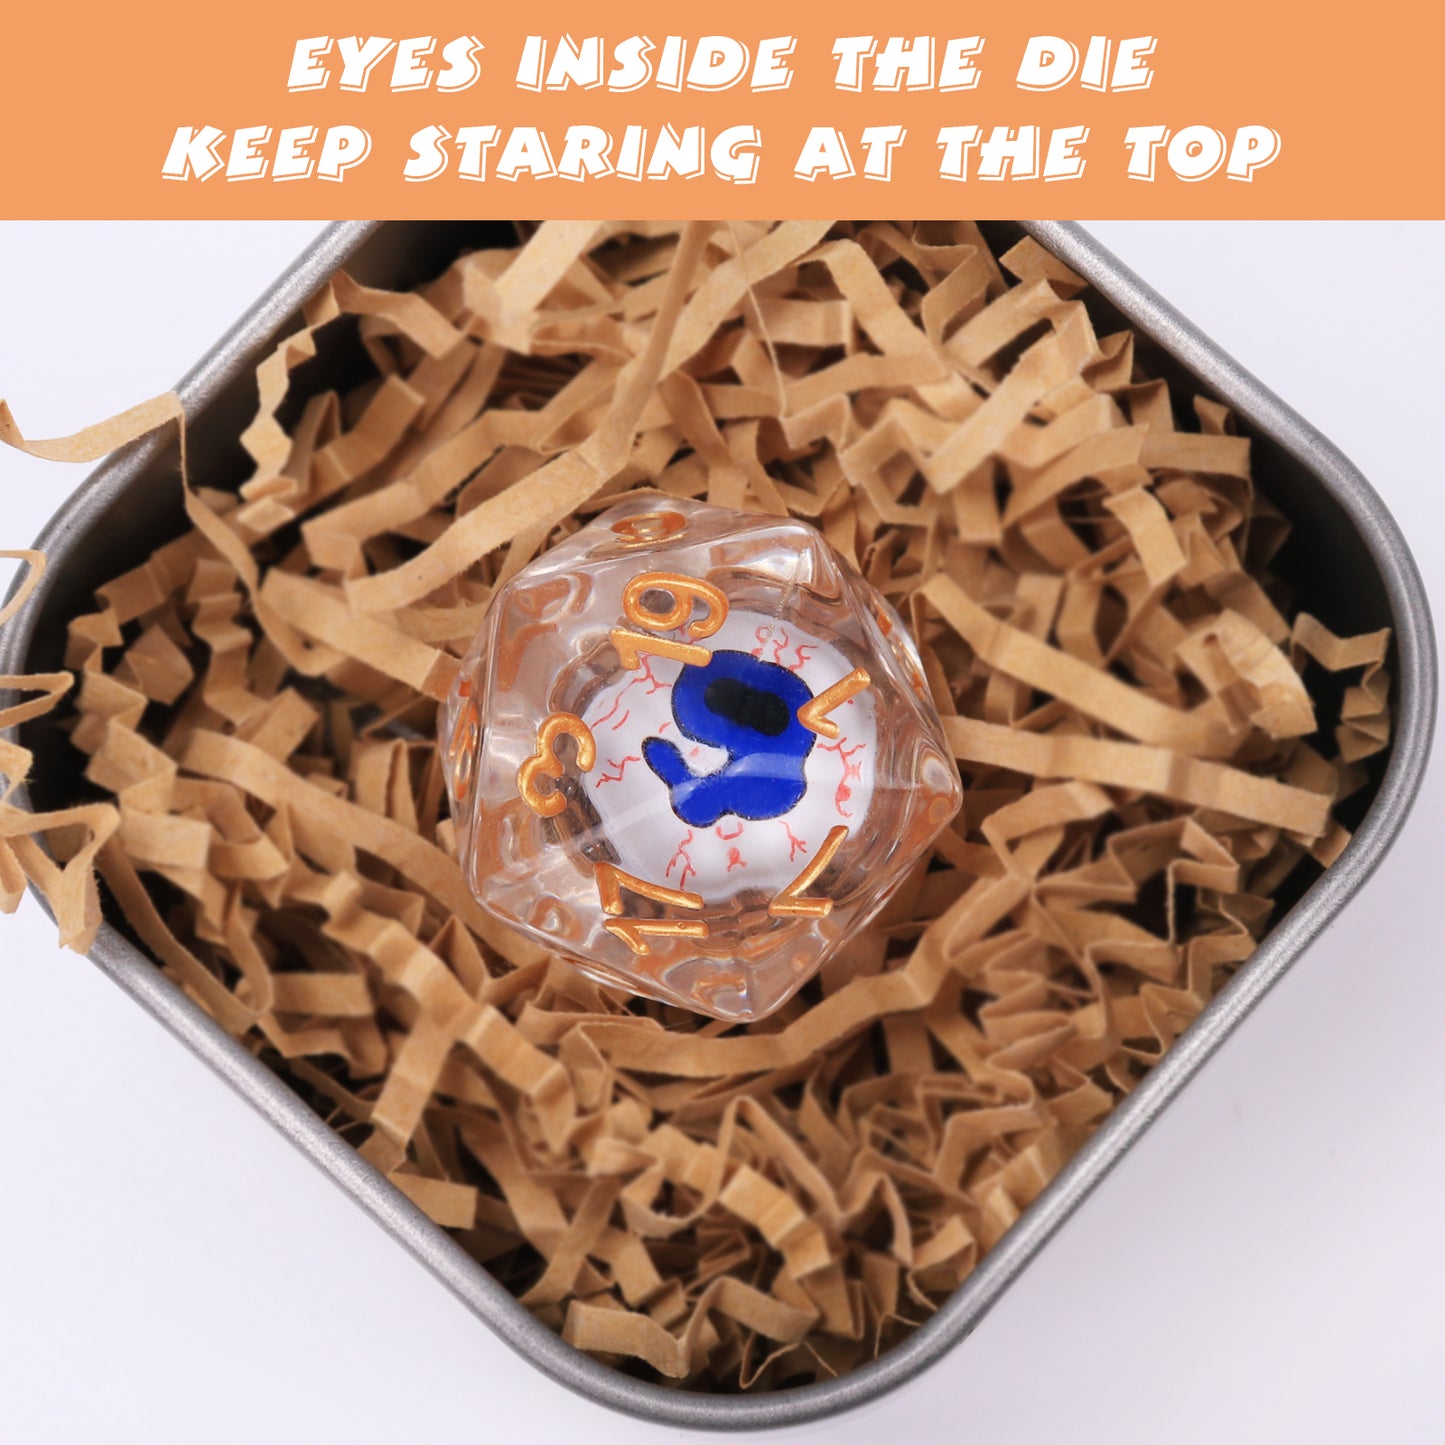 Byhoo DND Eyeball Dice with Metal Box, Byhoo D20 Dice of Dungeons and Dragons, DND Eye Dice with Case Set - Board Game 5e DND Accessories Handmade Dice for Tabletop RPG Game Starter Beginner